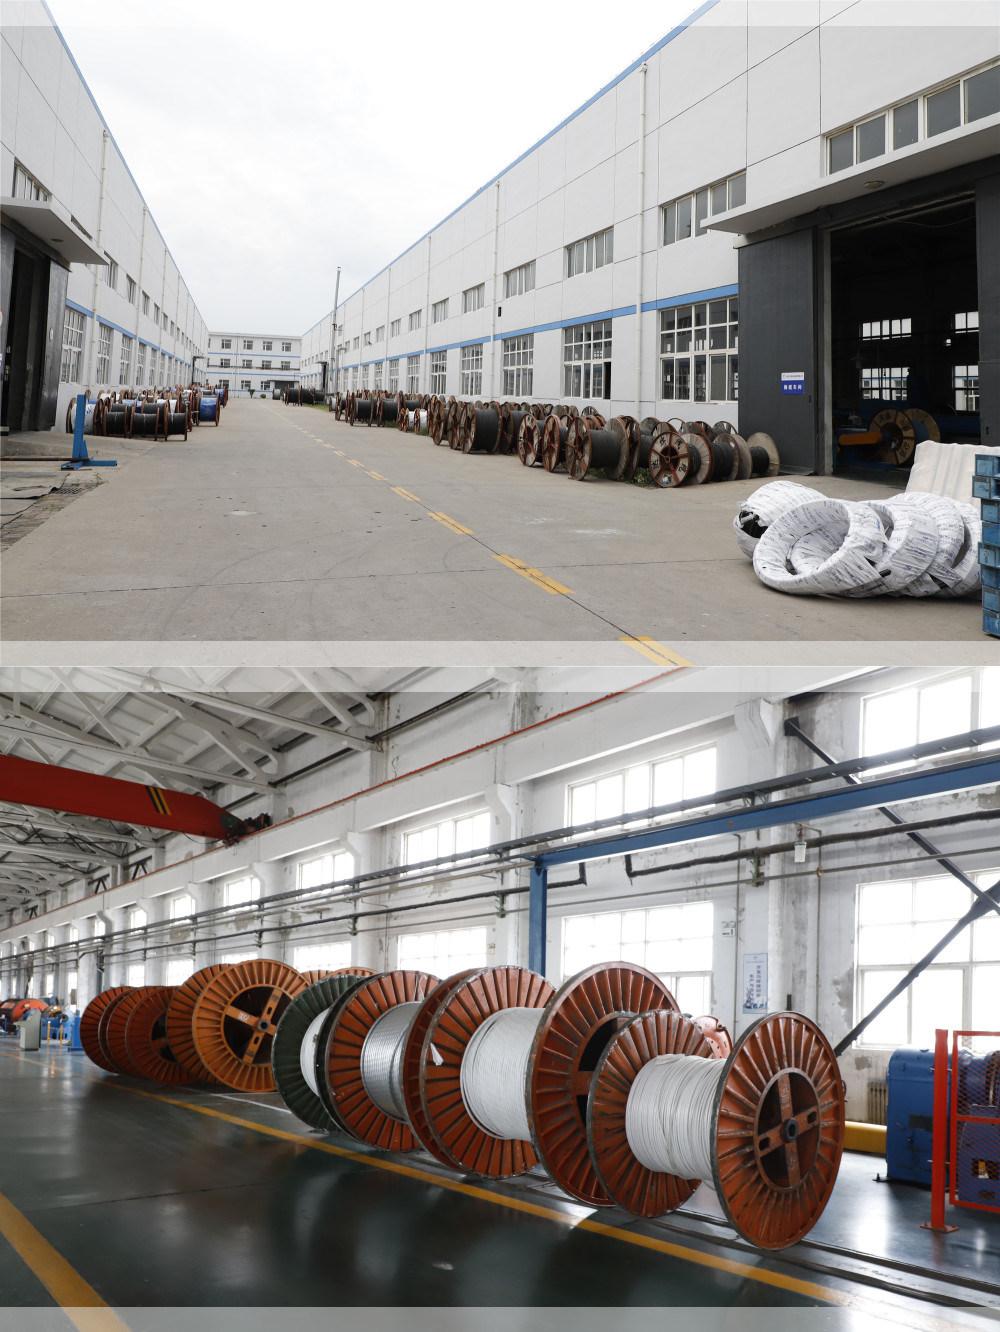 Insulation Diameter Connector Wiring for High-Speed Railways and Subways Railway Cable/Wire